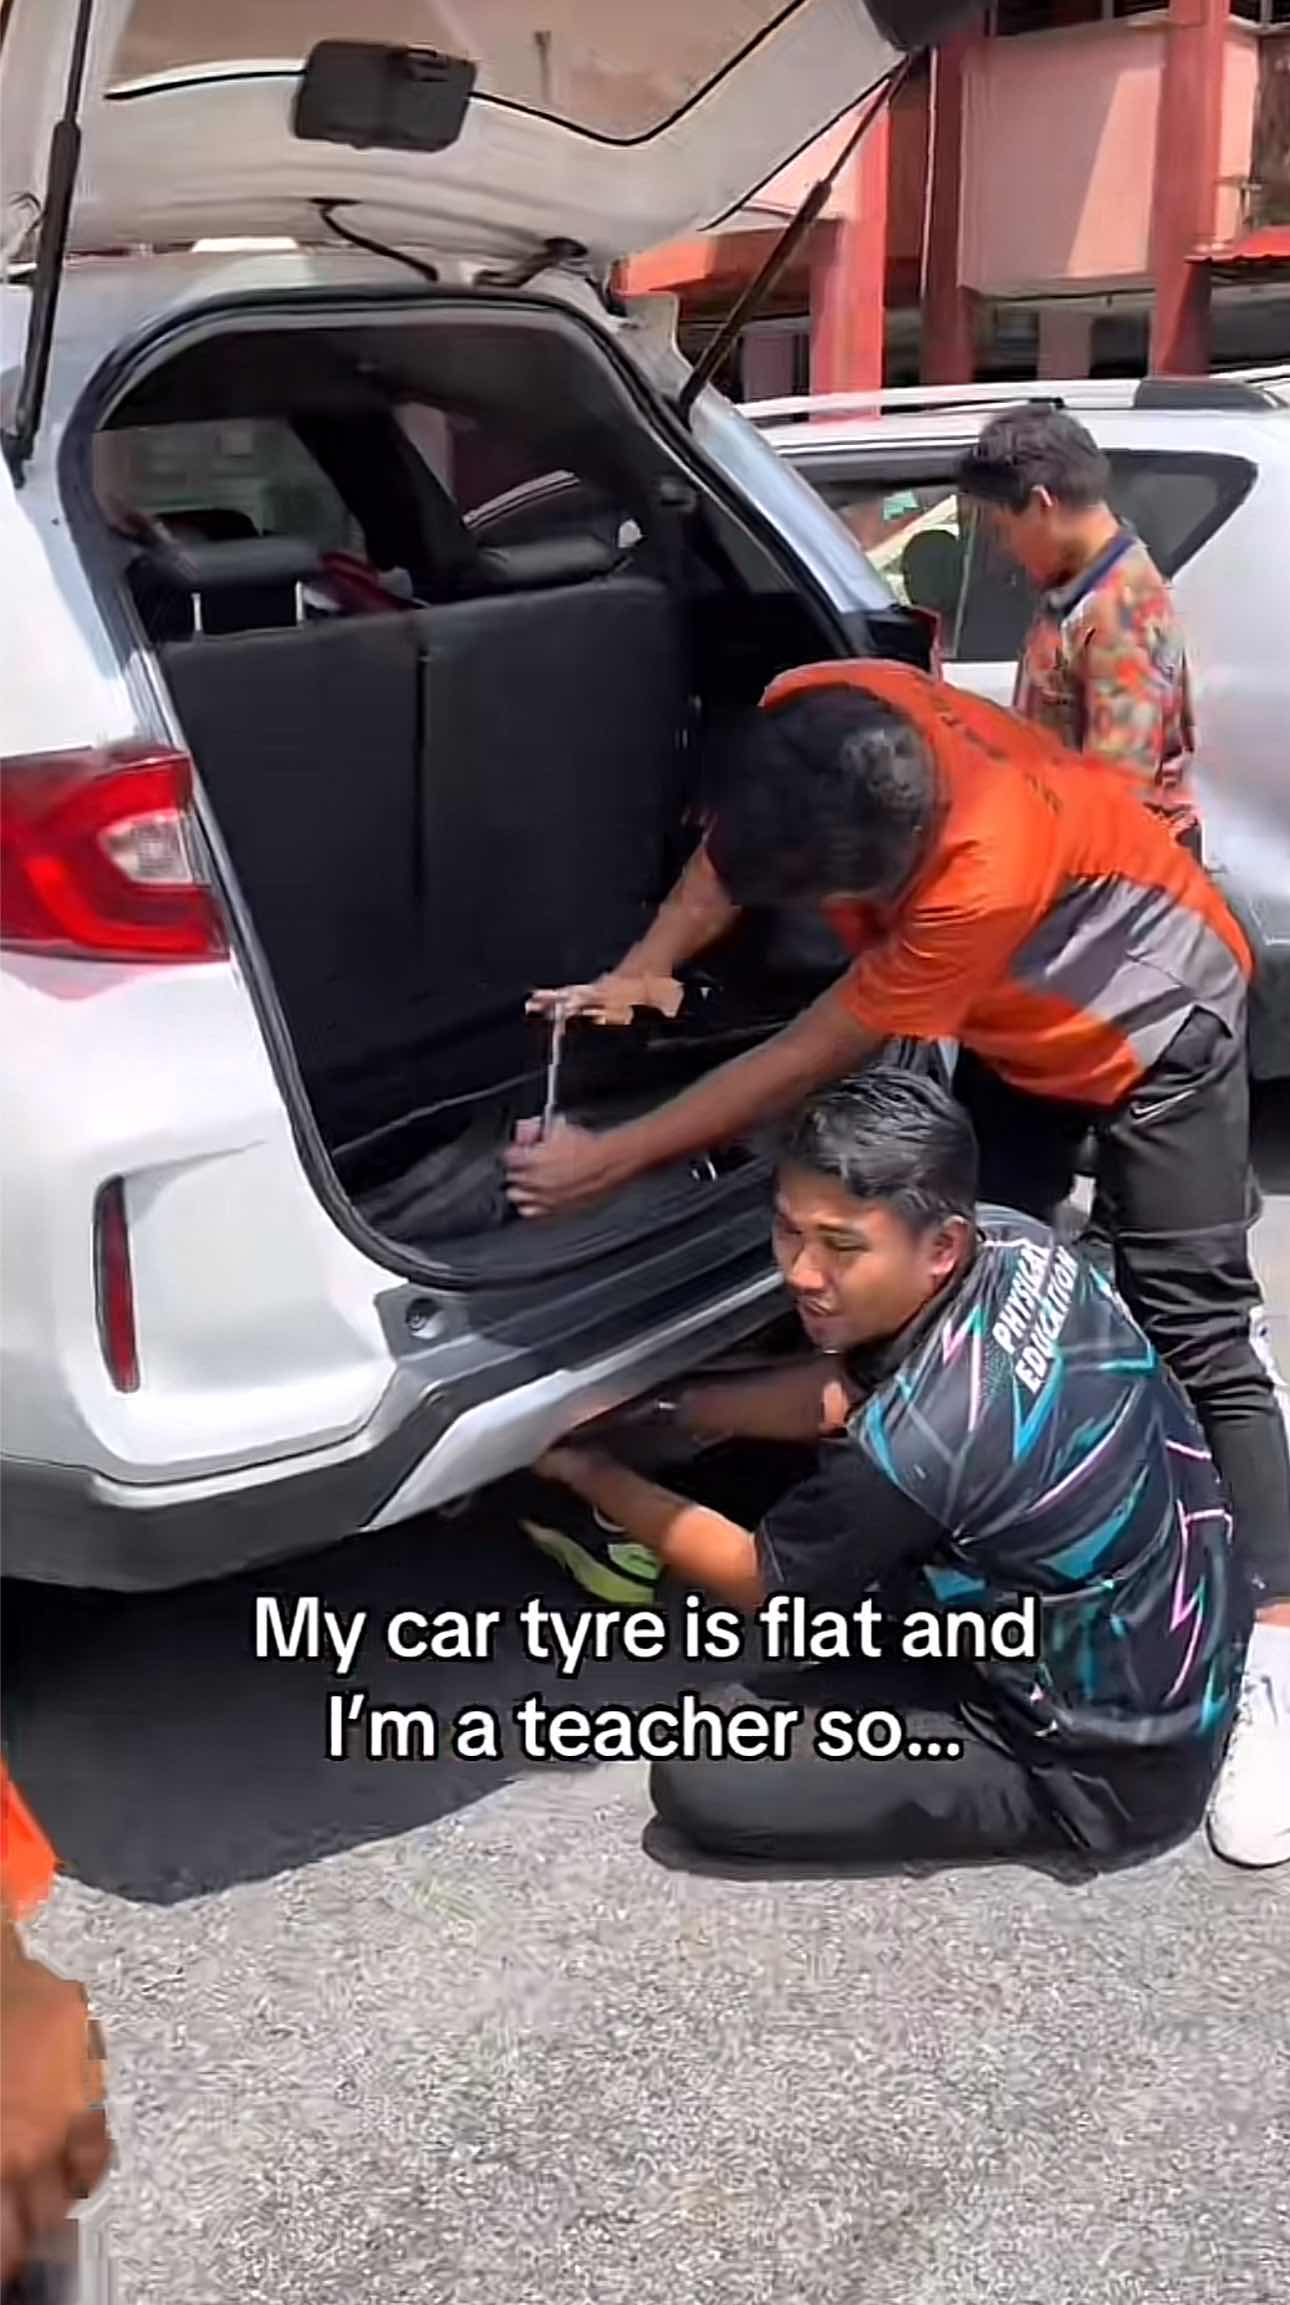 Friends helping out each other to fix teacher's car